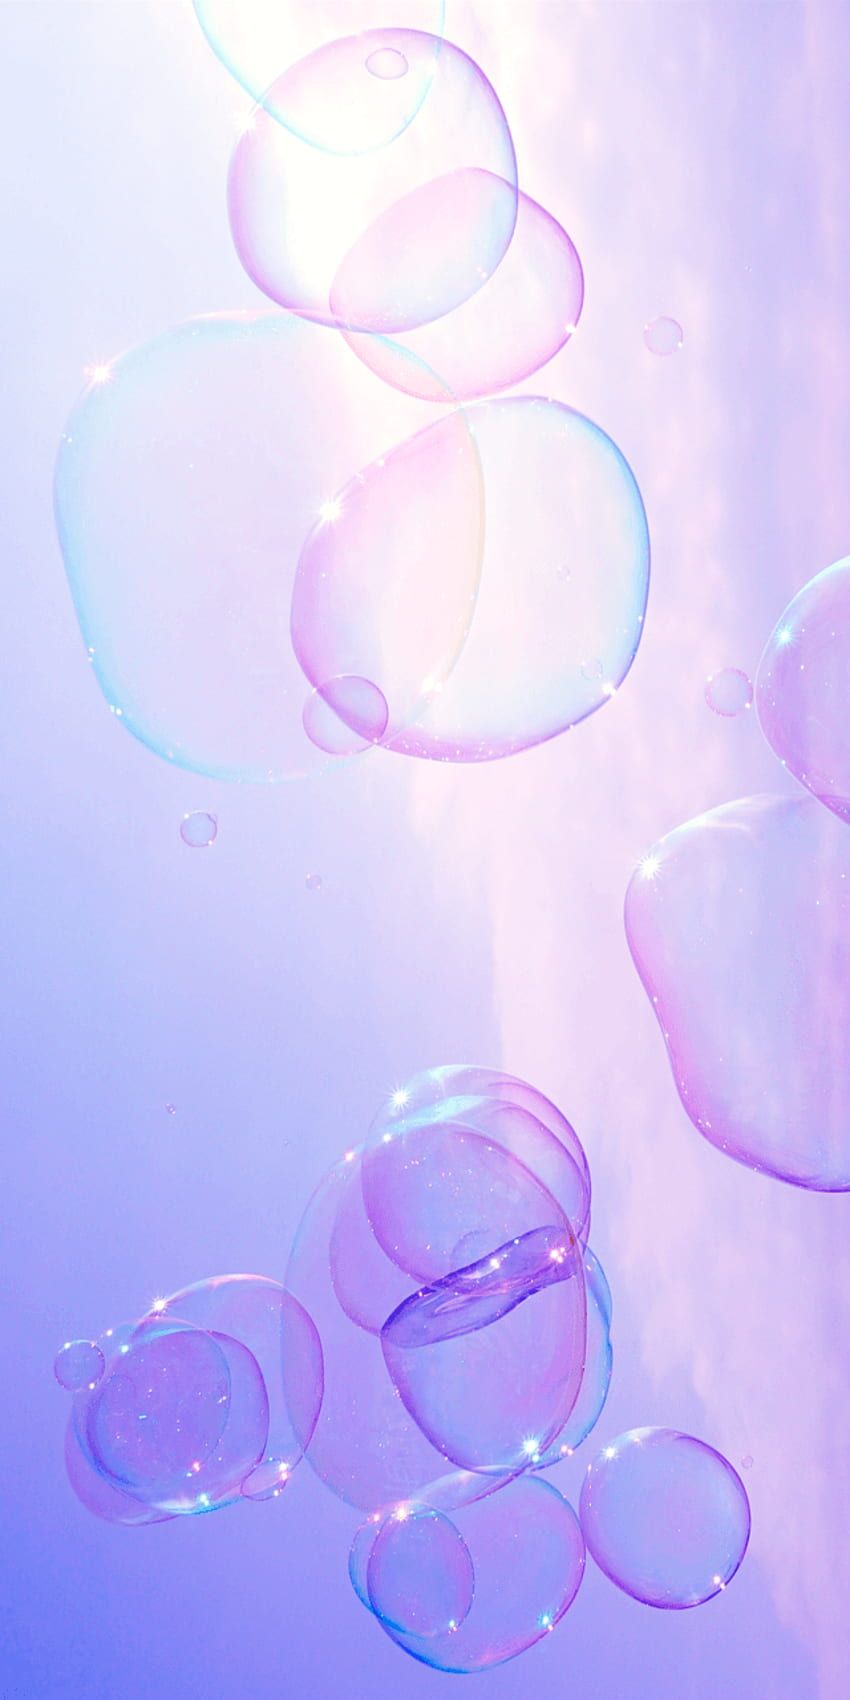 A group of bubbles floating in the air - Bubbles